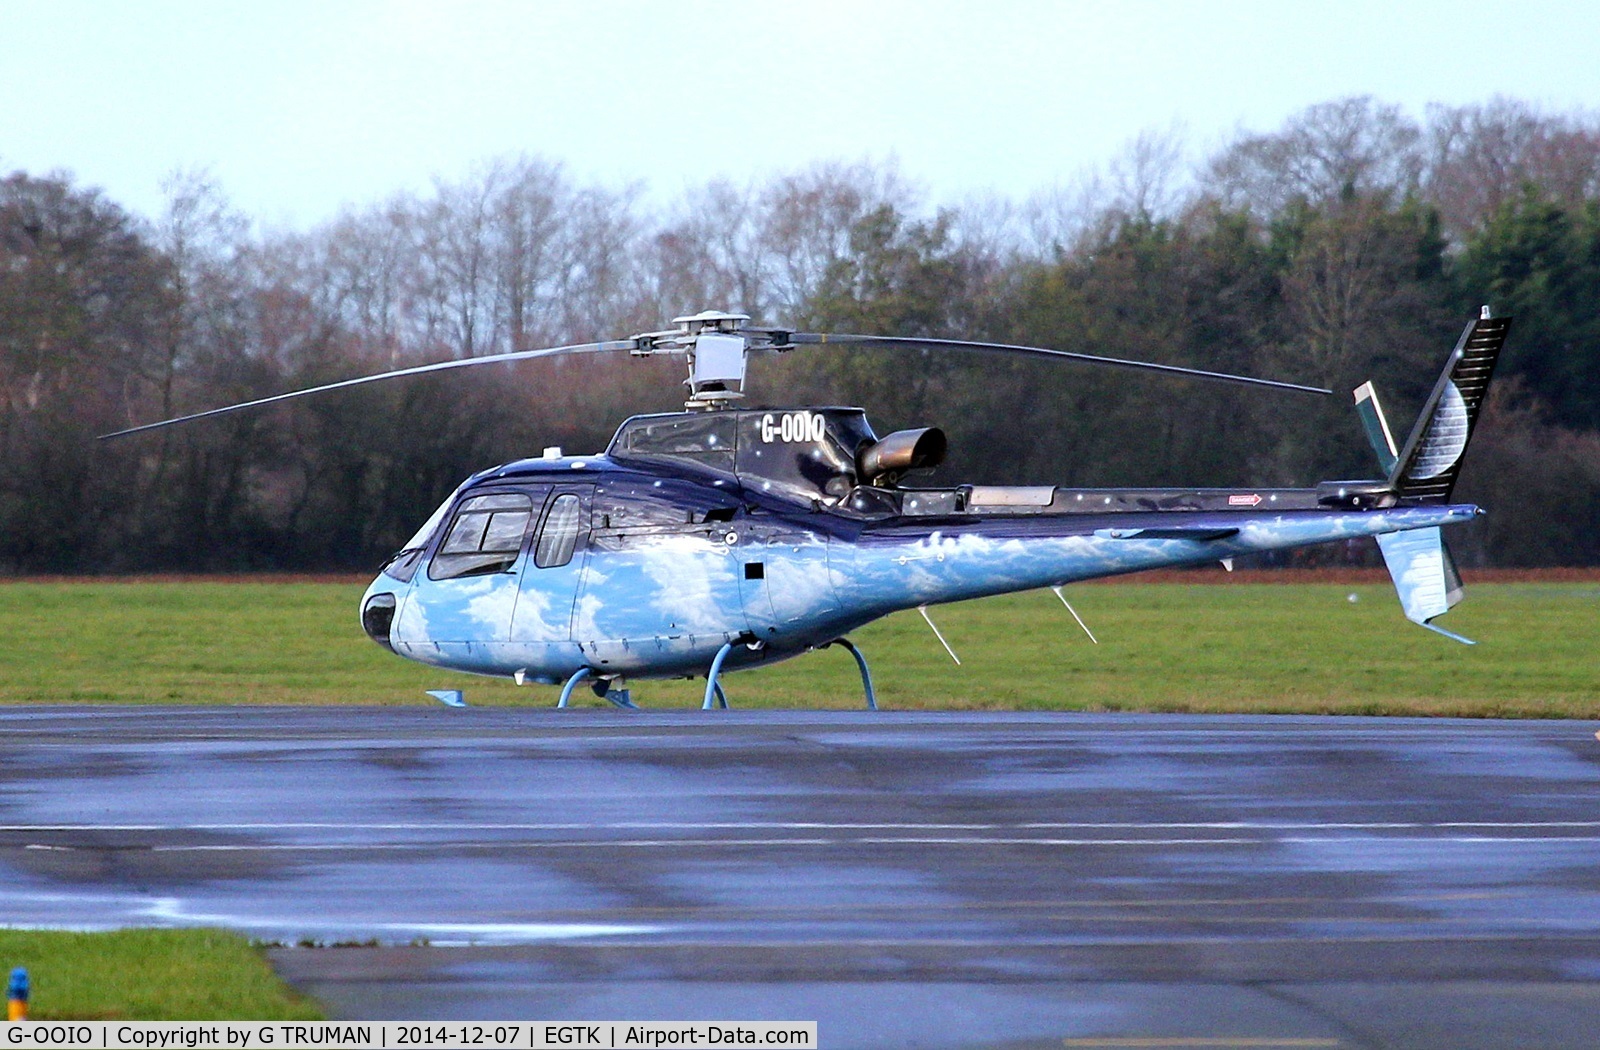 G-OOIO, 2001 Eurocopter AS-350B-3 Ecureuil Ecureuil C/N 3463, Visiting Oxford on a cold winter day